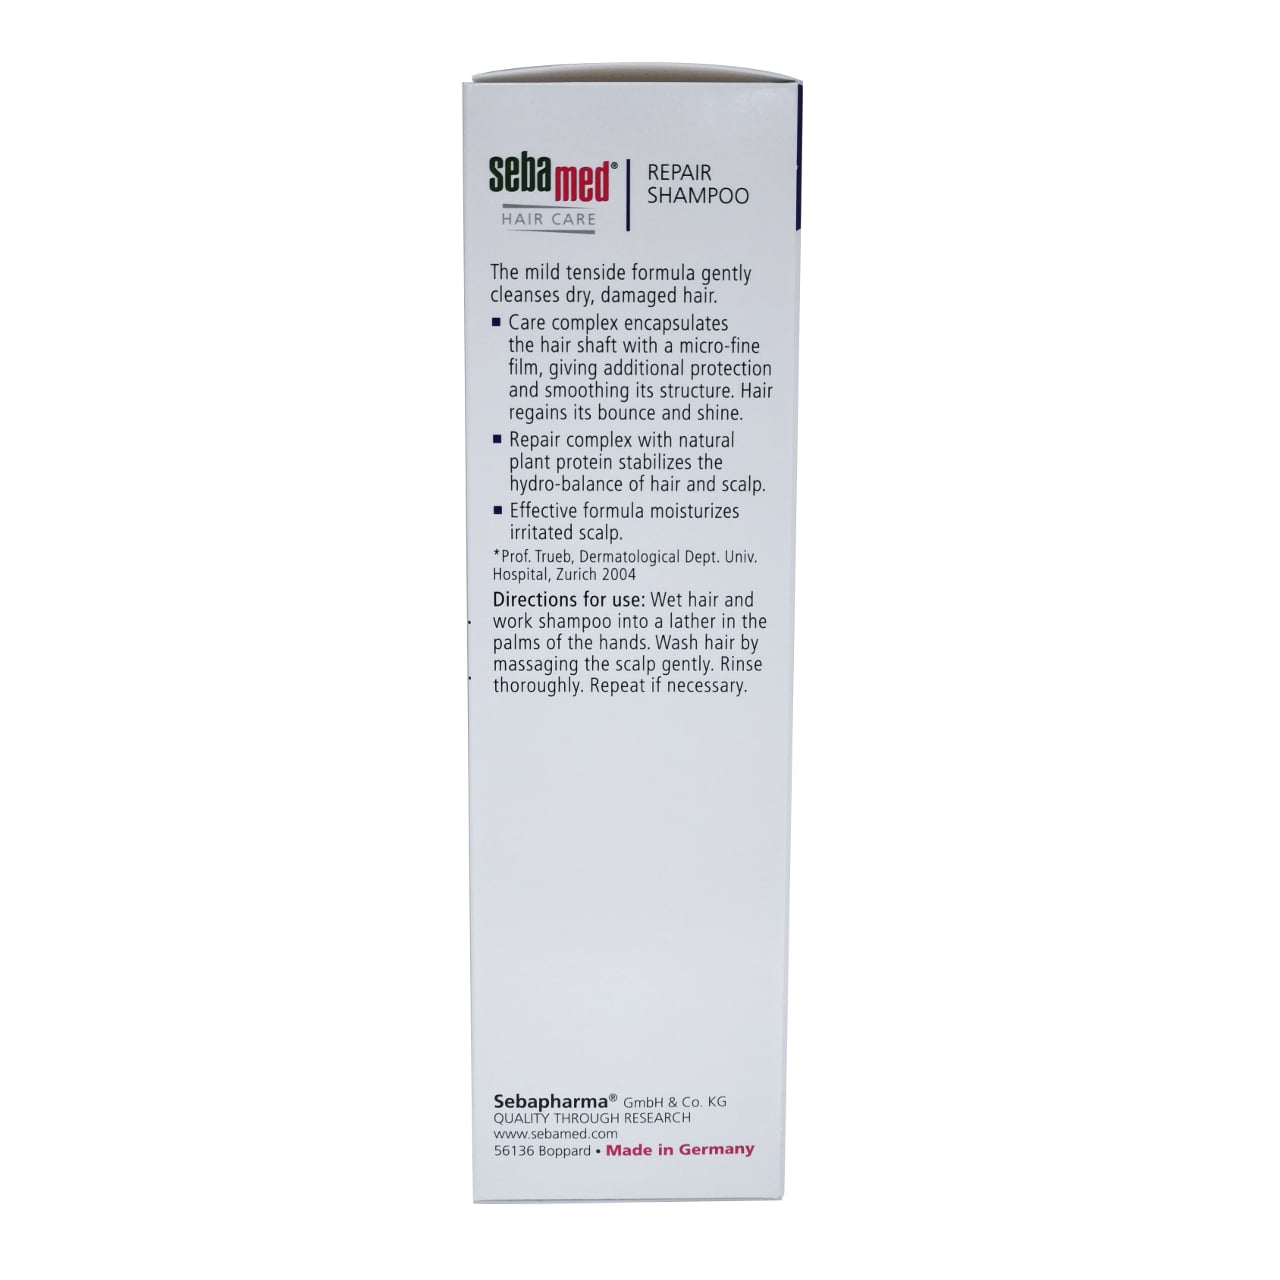 Product details and directions for Sebamed Hair Care Repair Shampoo